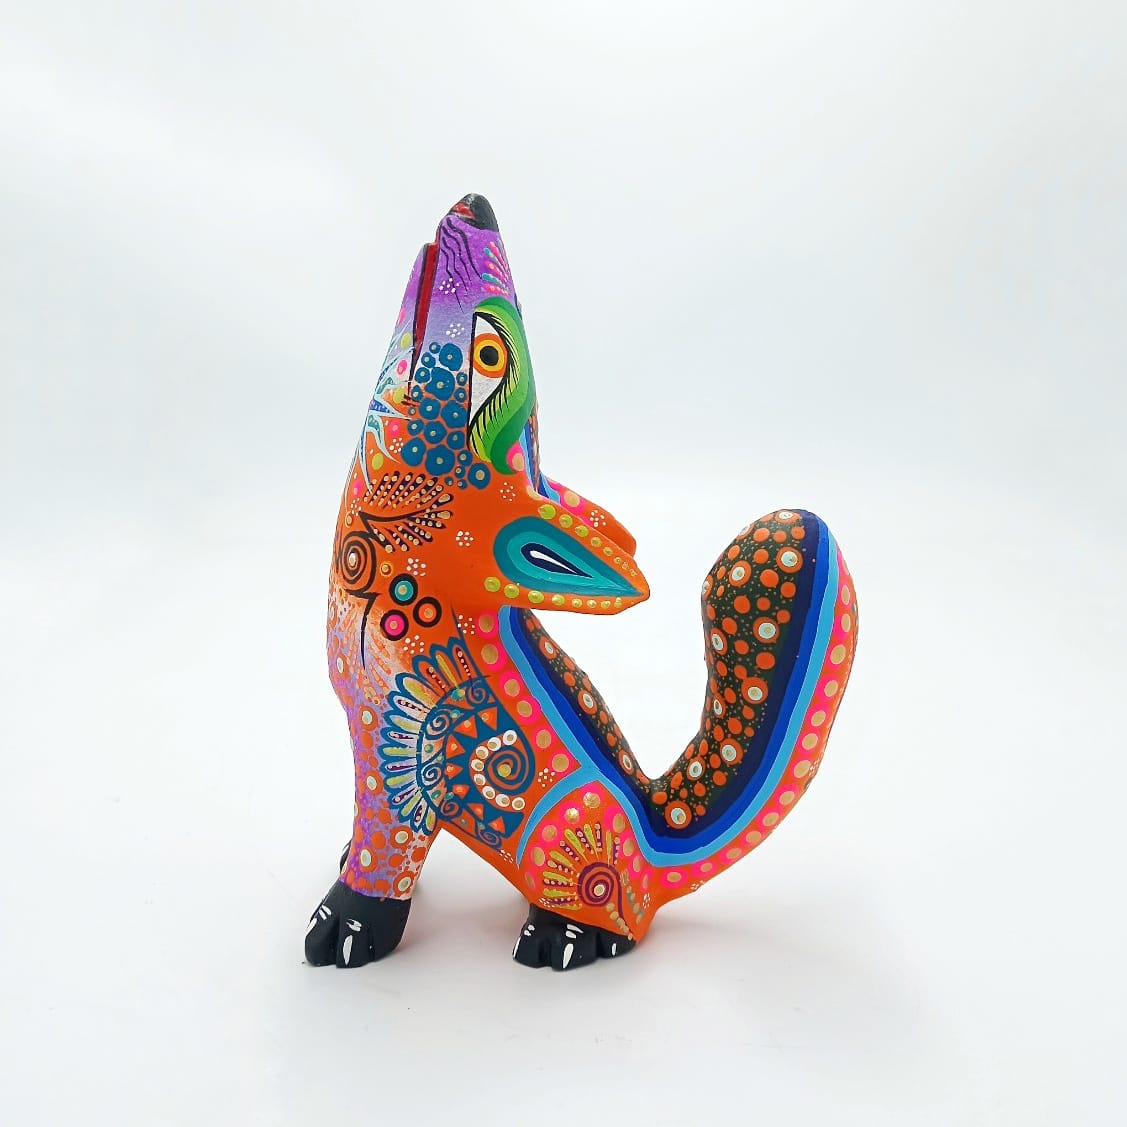 Oaxacan Wood Carving Alebrije Nahual Hand Made Coyote By Estudio 2403 PP6827